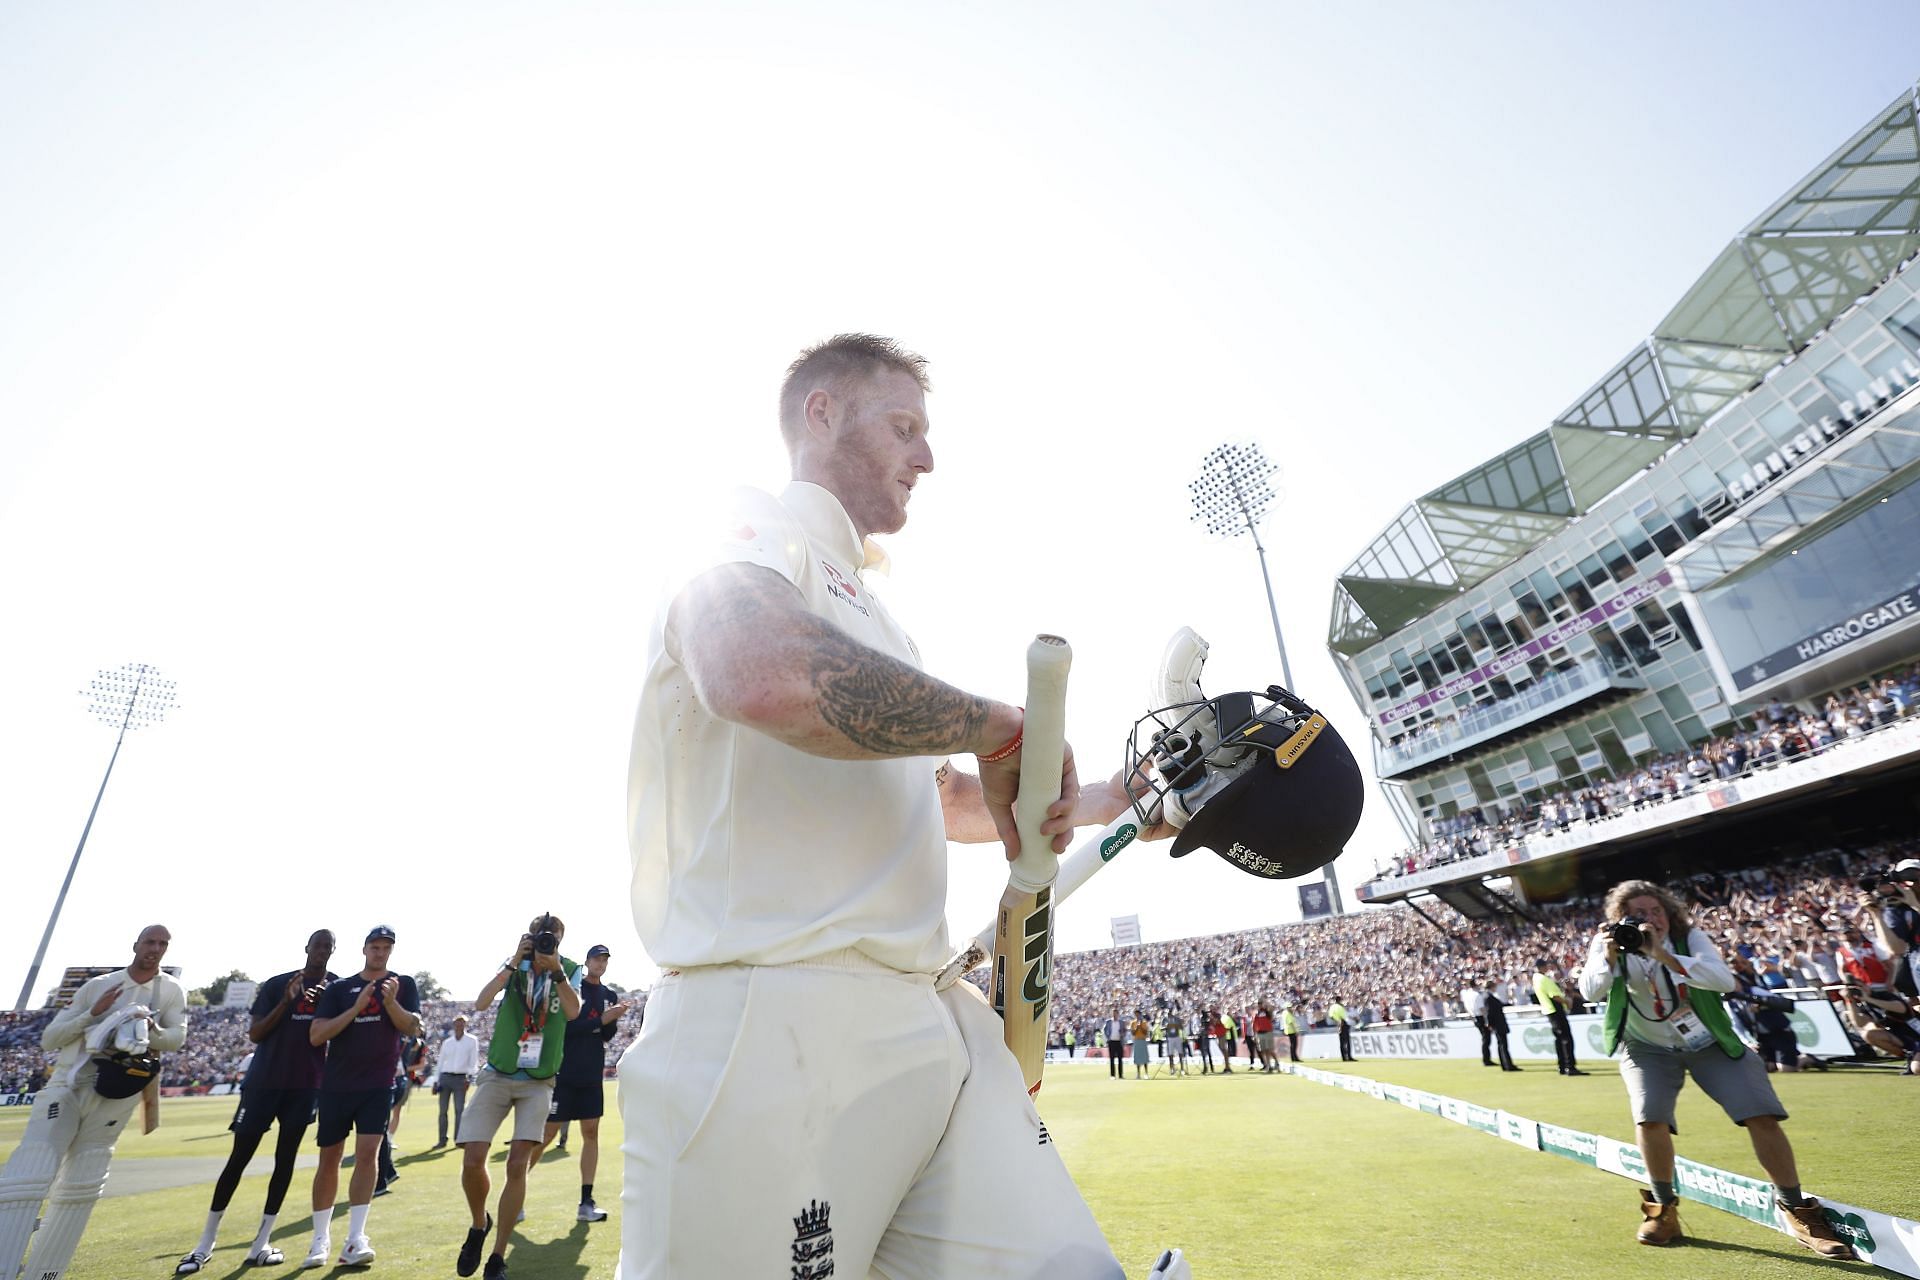 Ben Stokes produced one of the best Ashes innings of all time in the Headingly Test of 2019